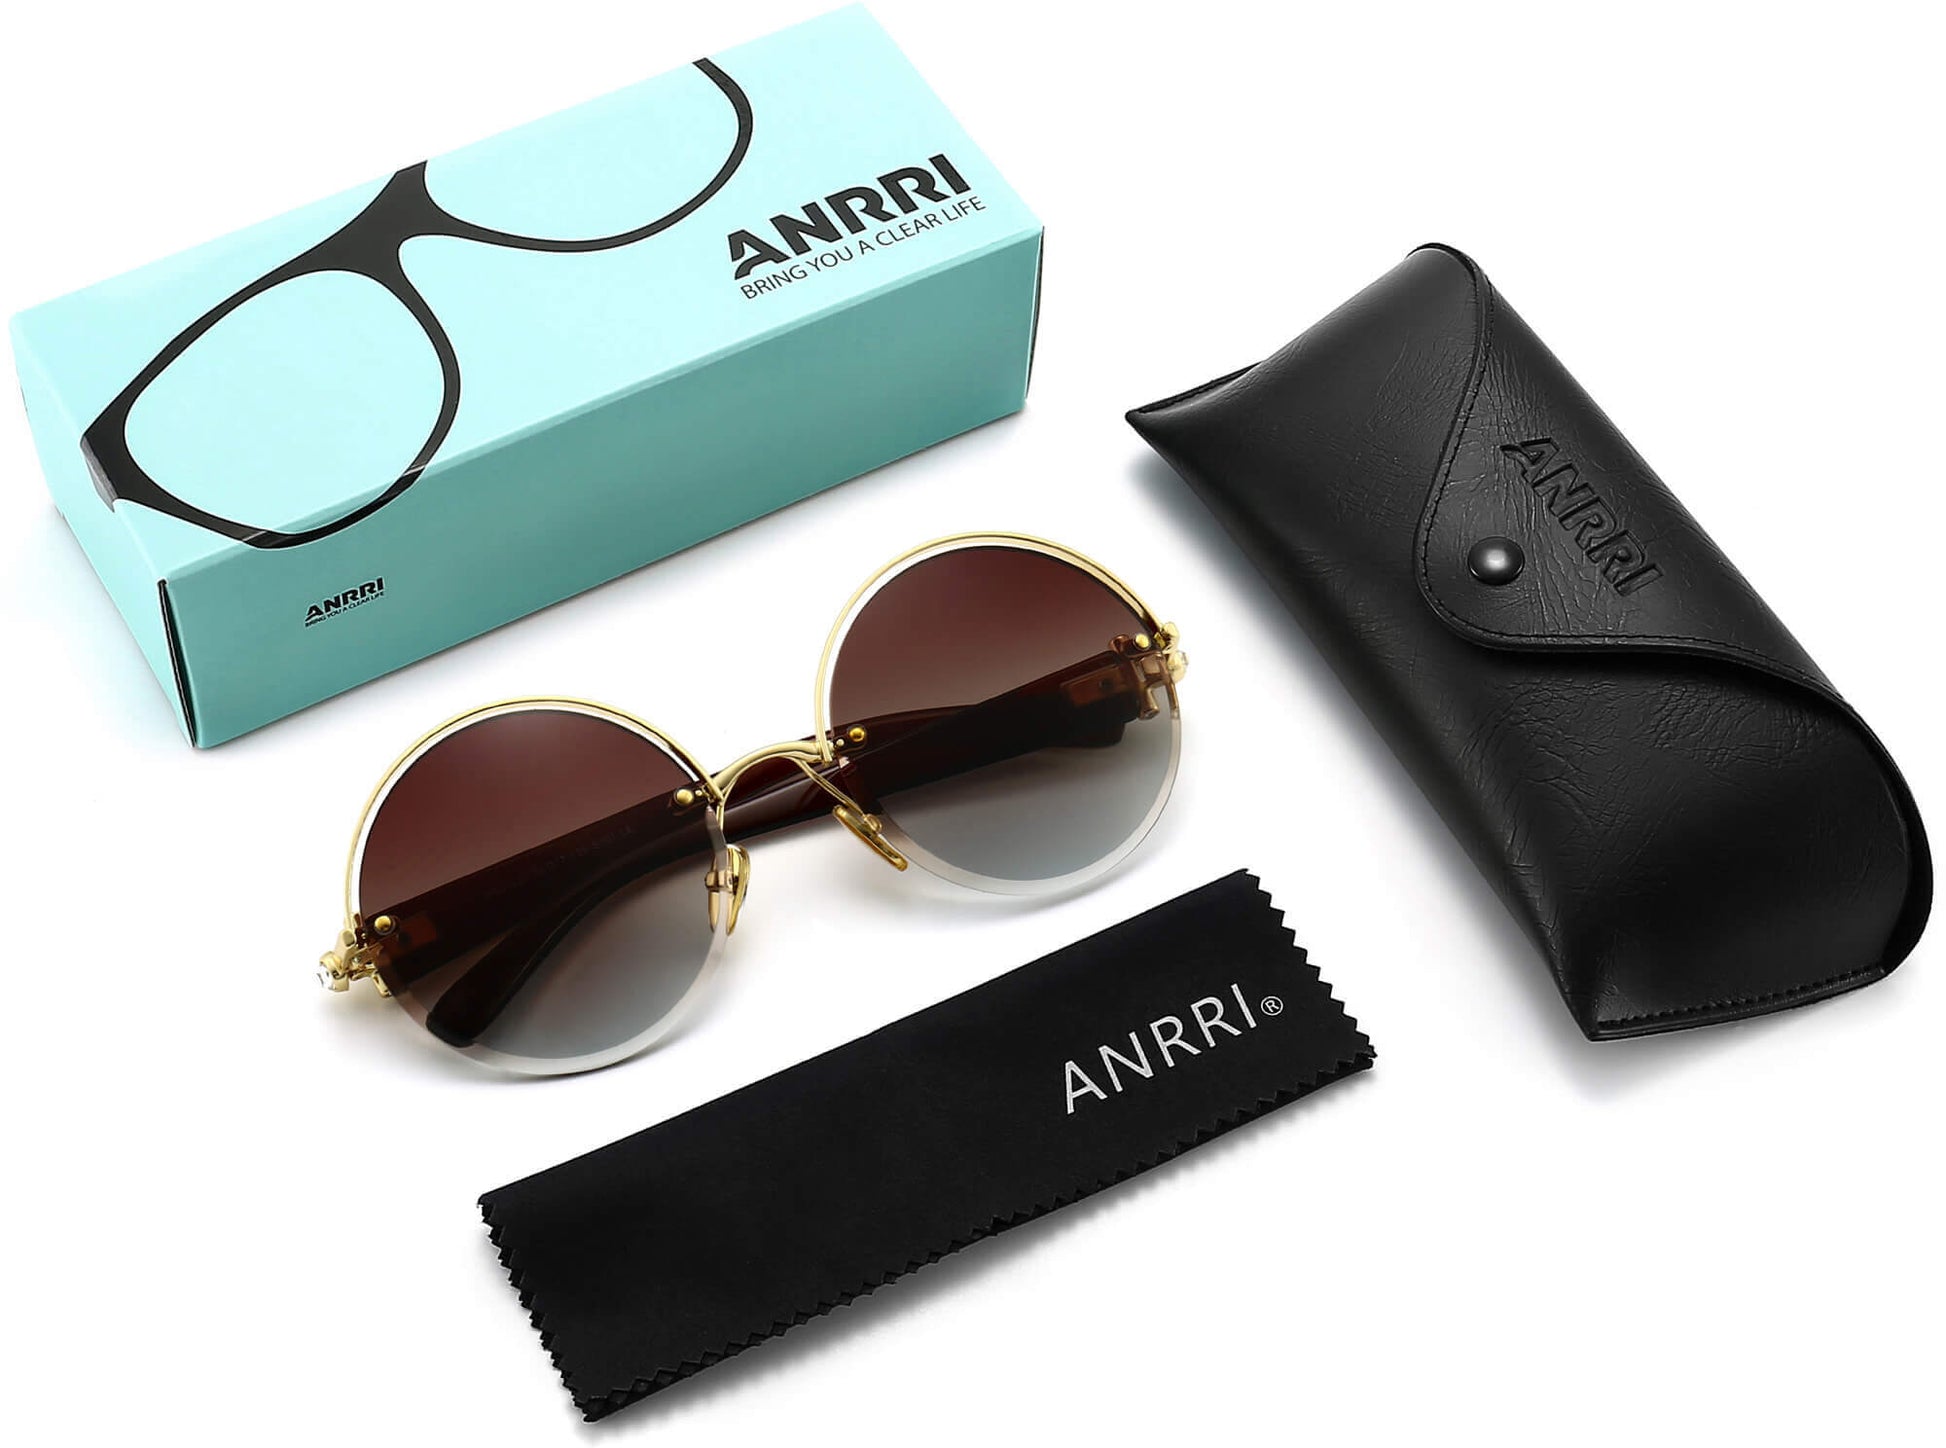 Norah Tortoise Stainless steel Sunglasses with Accessories from ANRRI